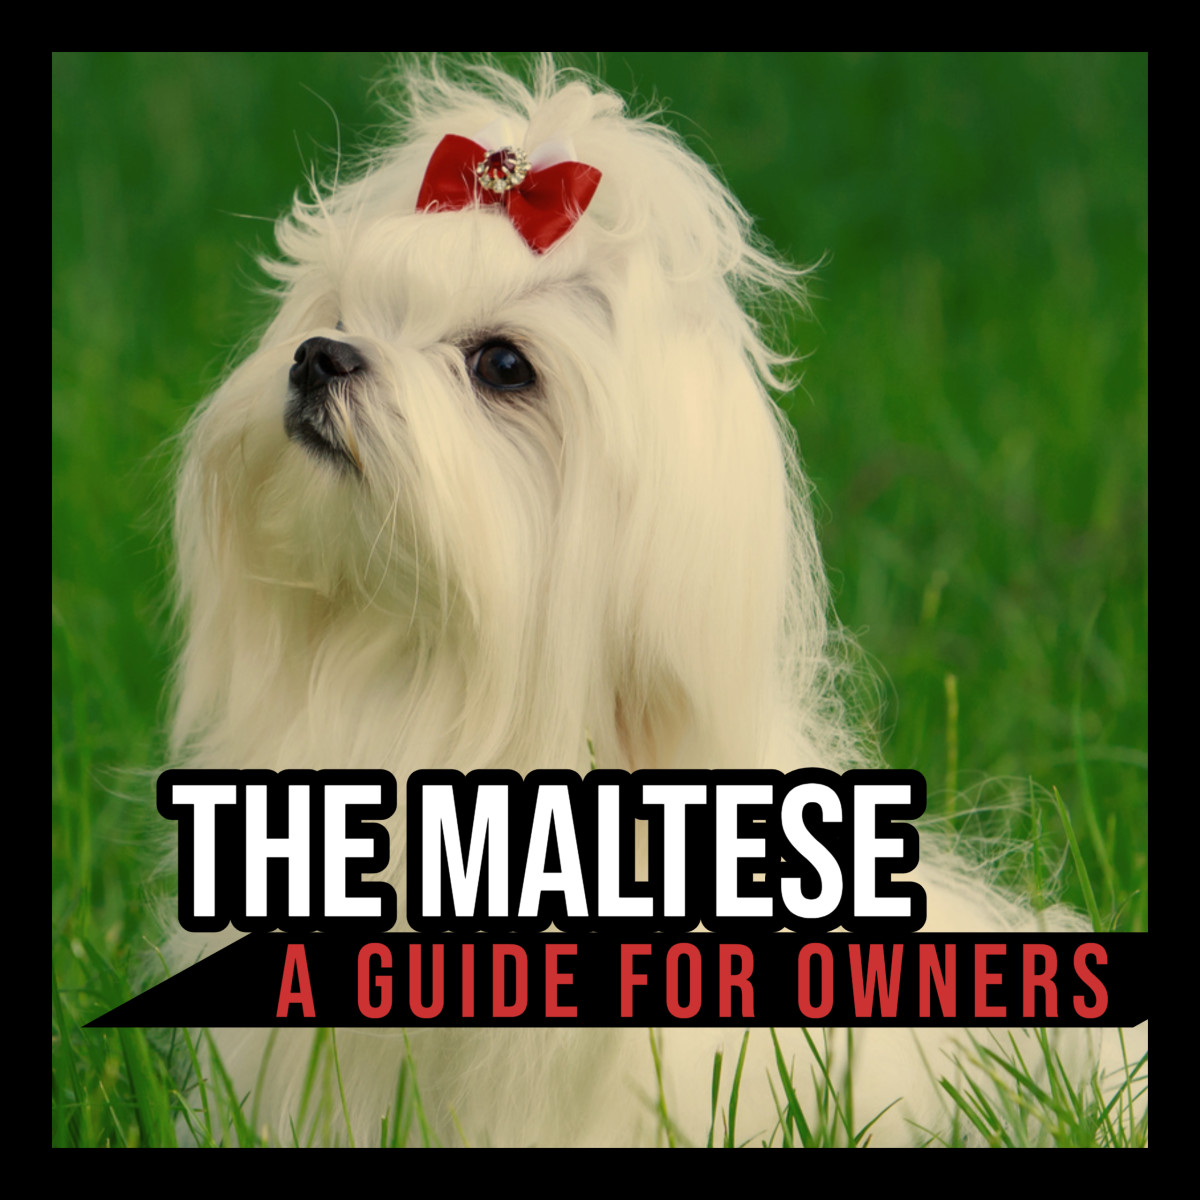 The Maltese: A Guide for Owners.